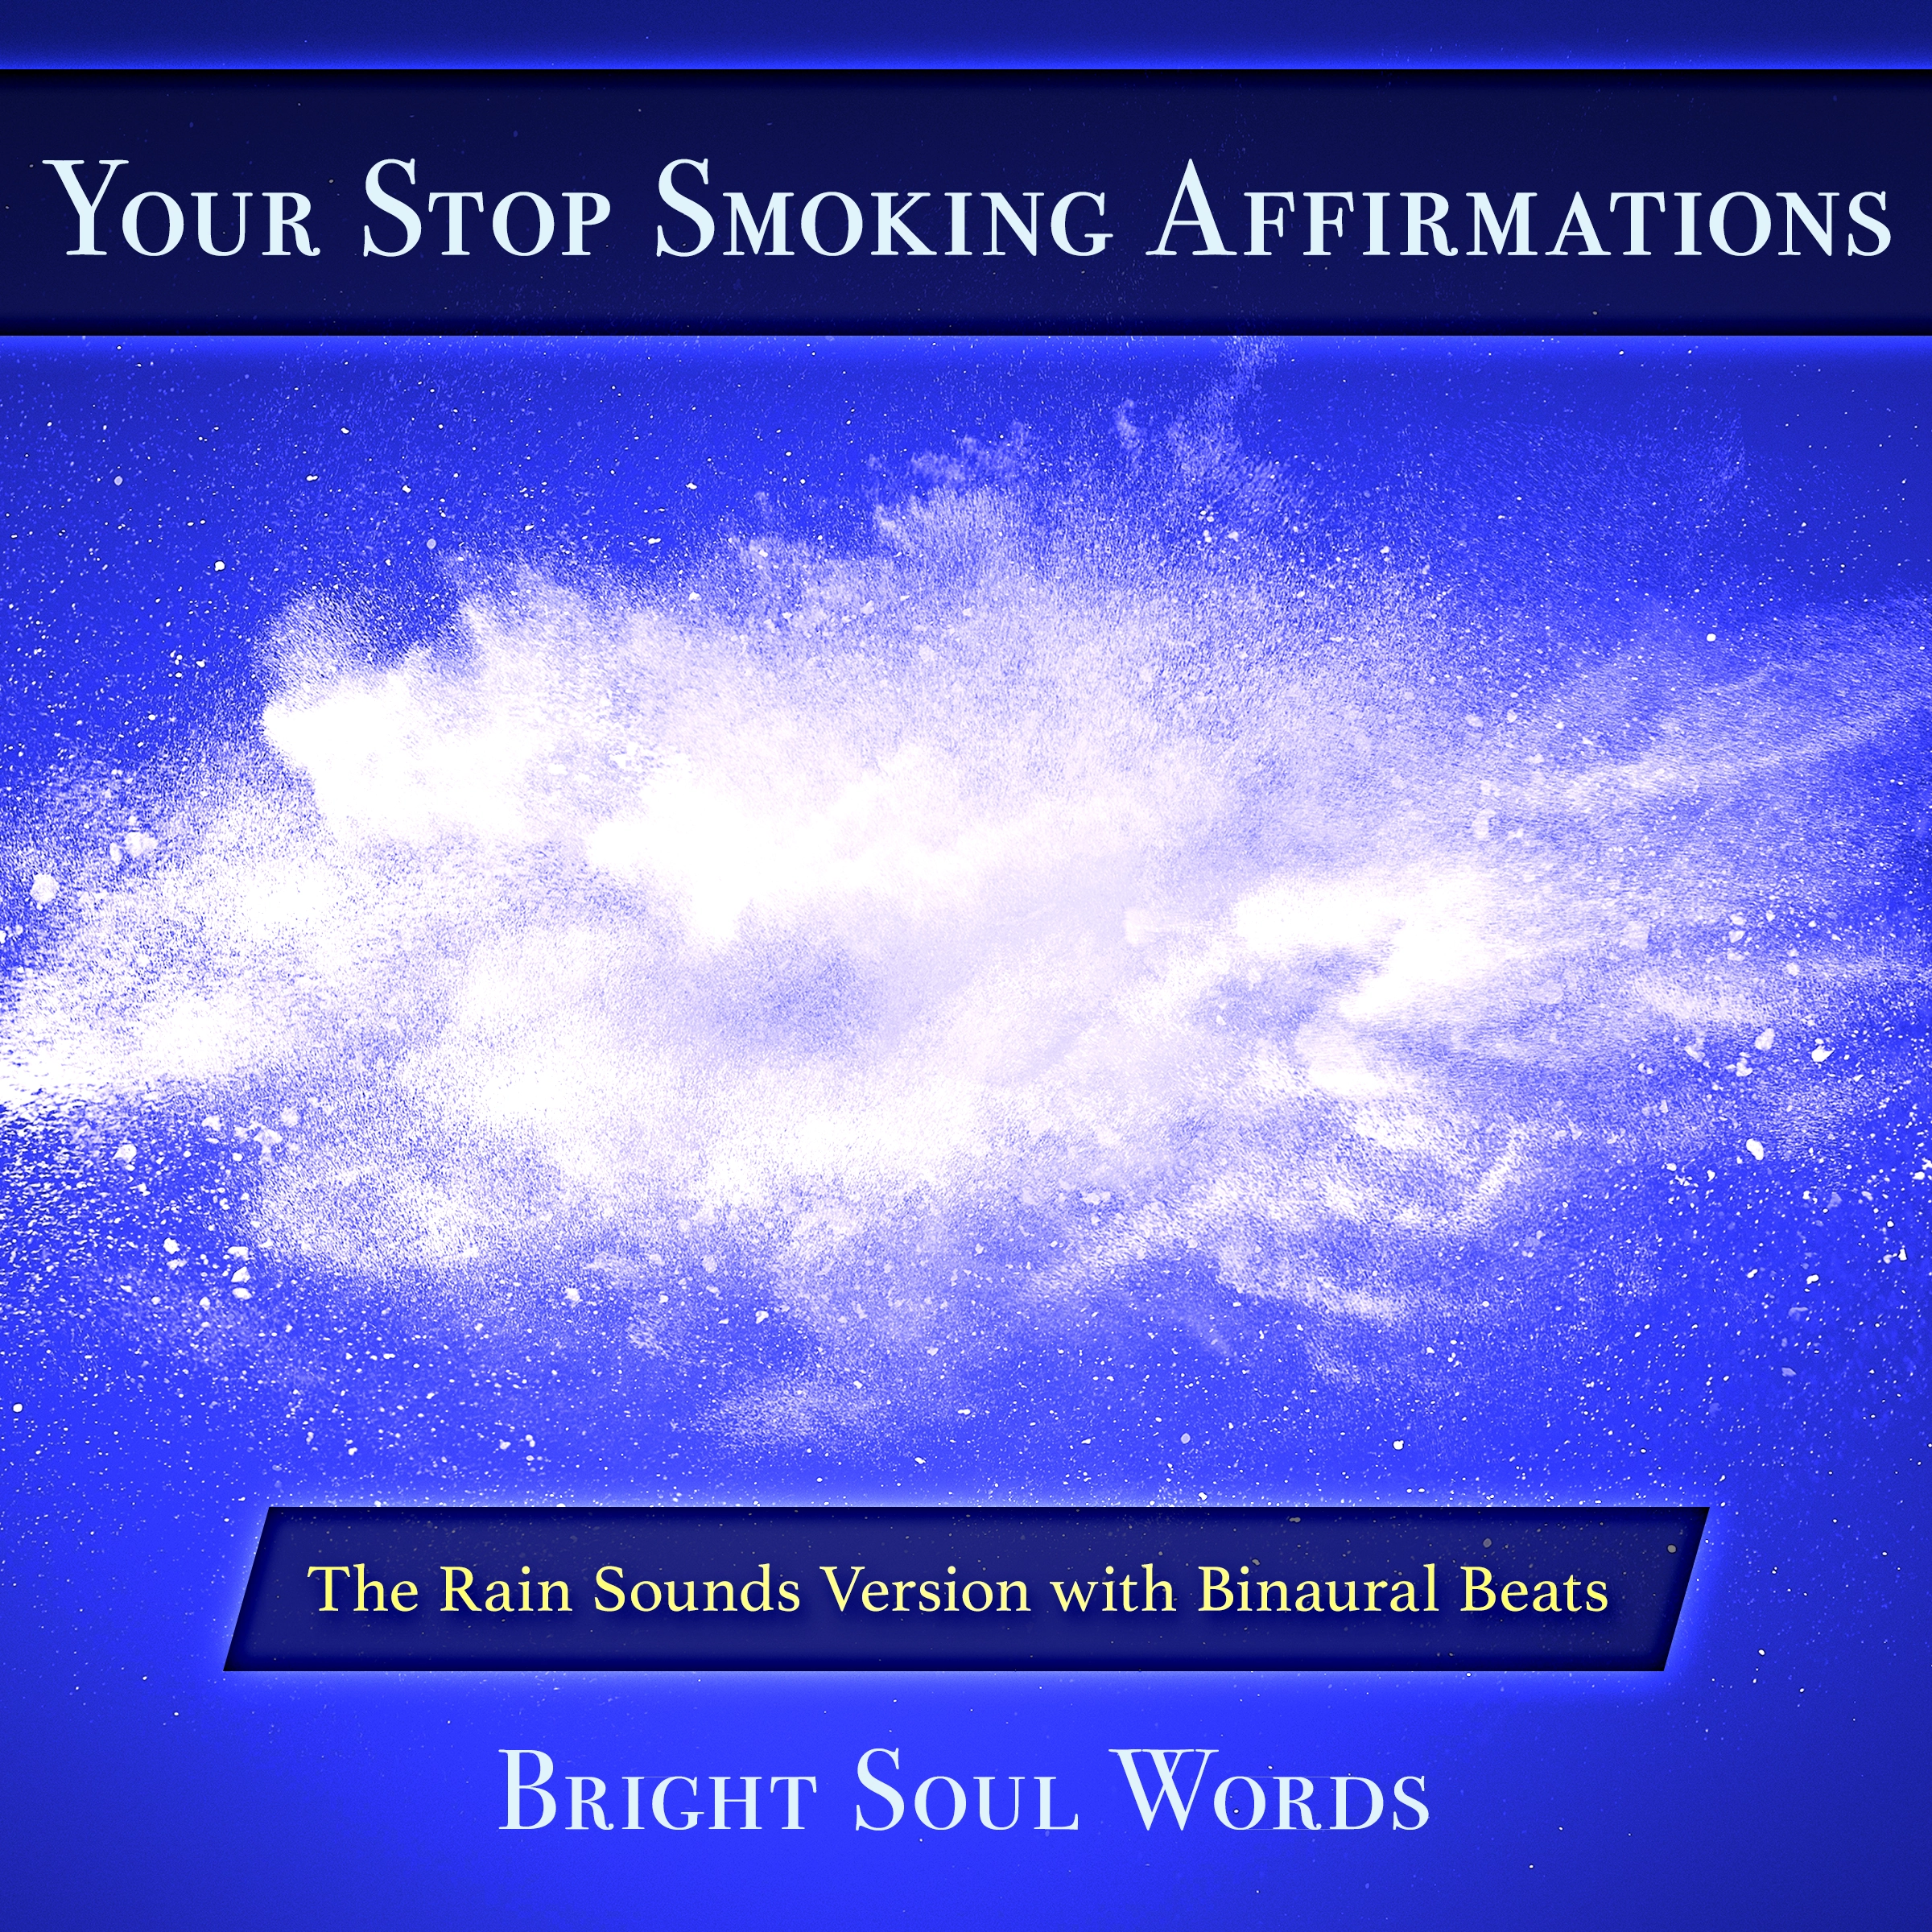 Your Stop Smoking Affirmations: The Rain Sounds Version with Binaural Beats Audiobook by Bright Soul Words